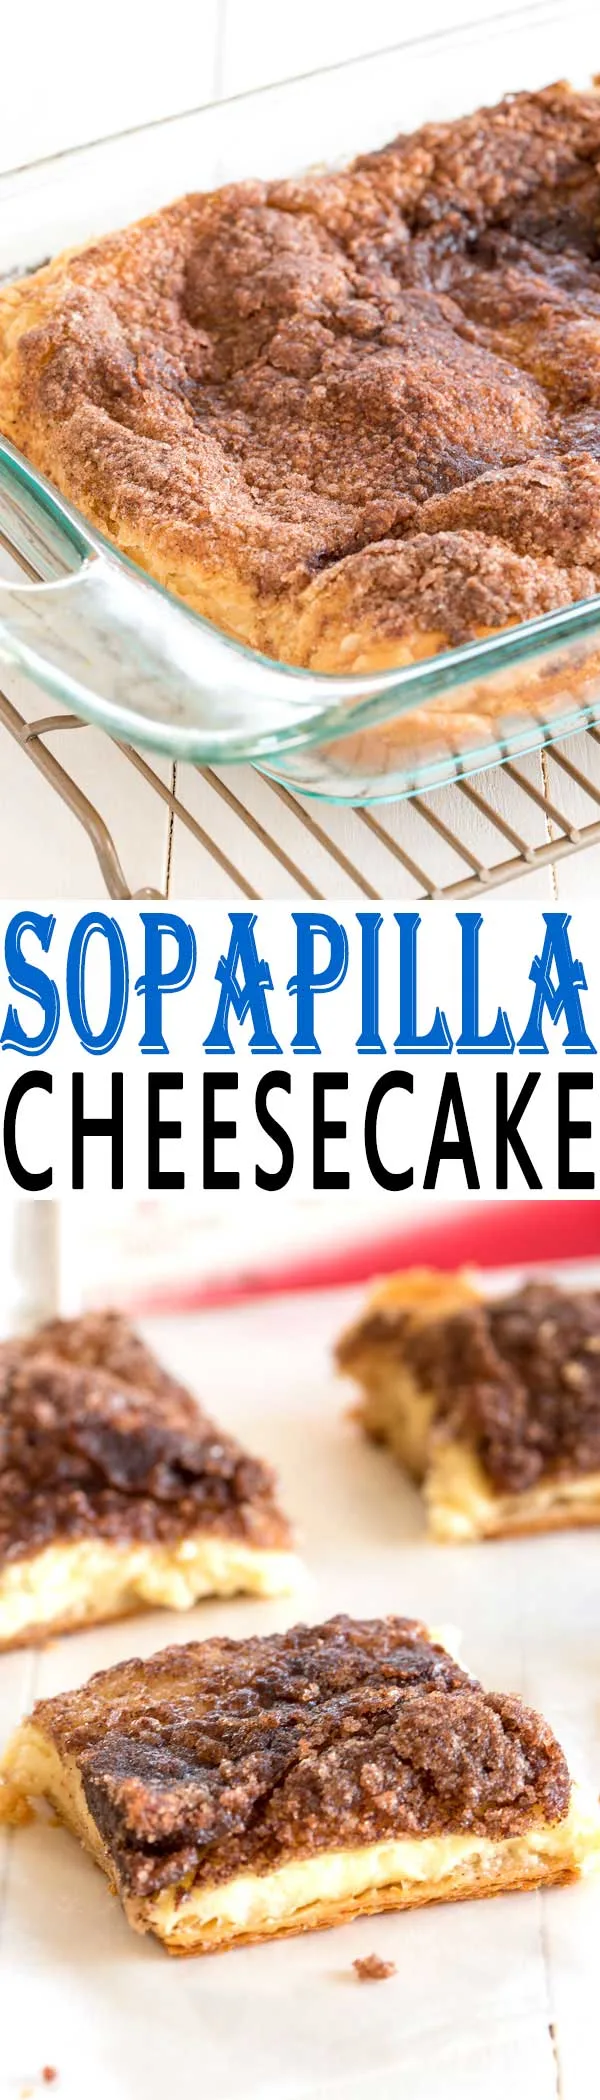 Puff Pastry Sopapilla Cheesecake Bars - this easy recipe takes a favorite Mexican dessert to a whole new level using Puff Pastry! {AD} @PuffPastry https://ooh.li/96bb360 #InspiredByPuff #puffpatsry #cheesecake #dessert #dessertrecipe #desserttable #recipe #food #foodblog #recipeideas #recipeoftheday